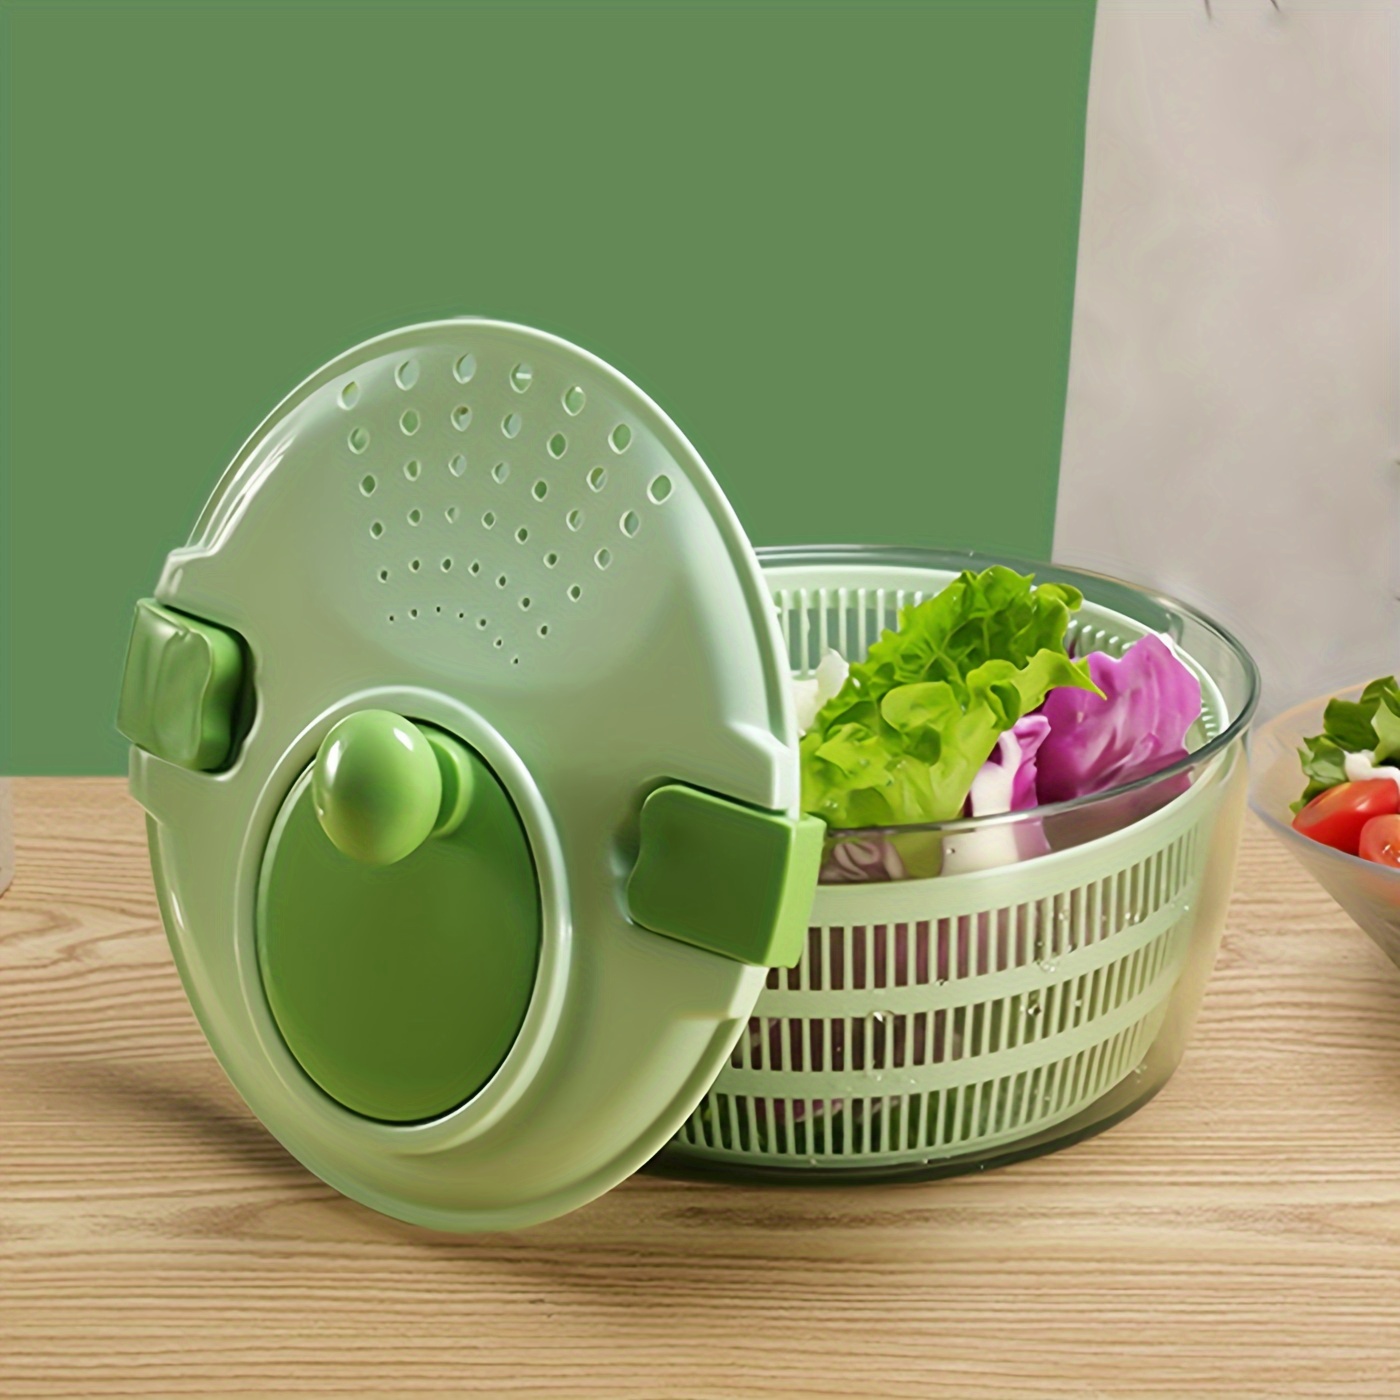 Fruit Cleaner Spinner, Large Fruit Washer Spinner with Brush,with Fruit  Washing Bowl, Fruit and Salad Cleaner,Vegetable Scrubber - AliExpress